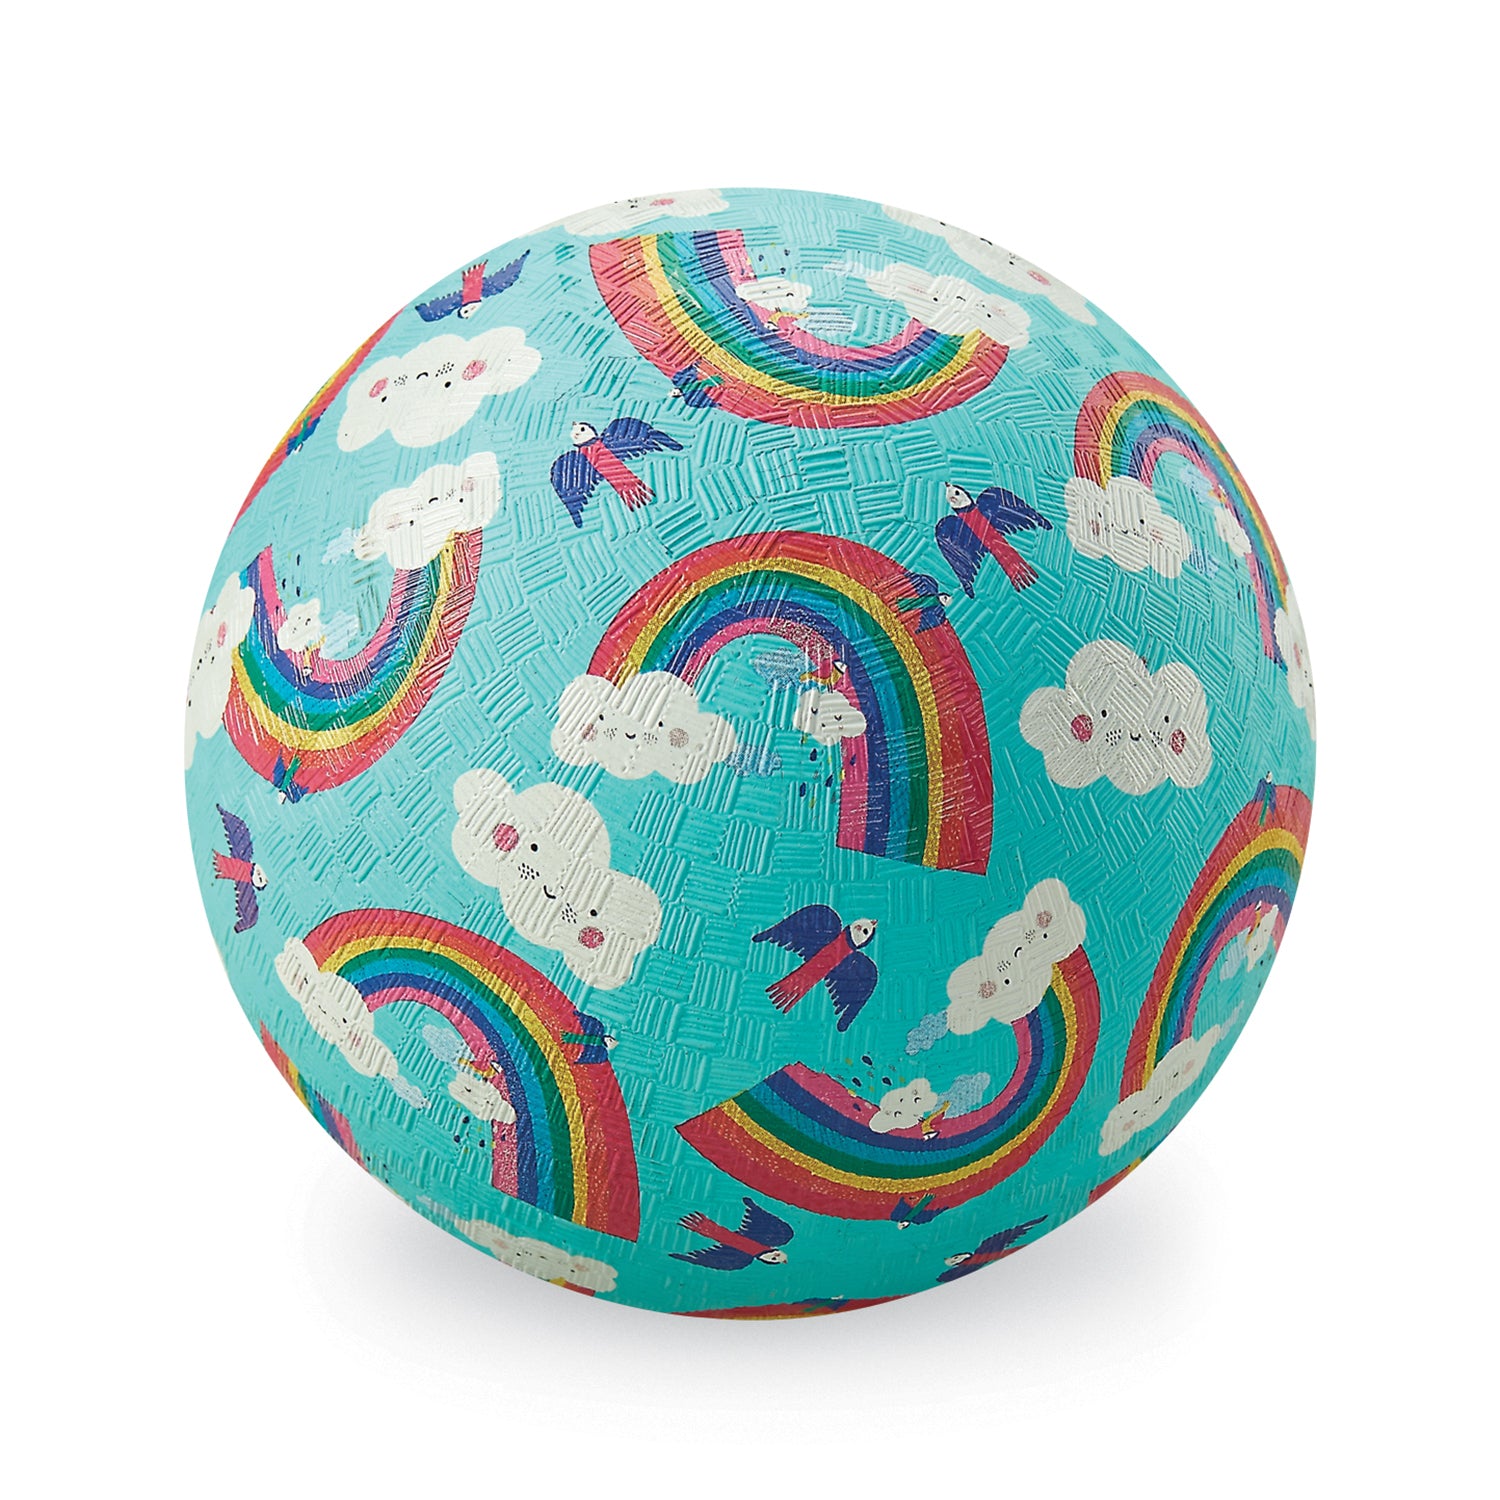 Toddler Ball - Rainbow Dreams-Balls-Second Snuggle Preloved